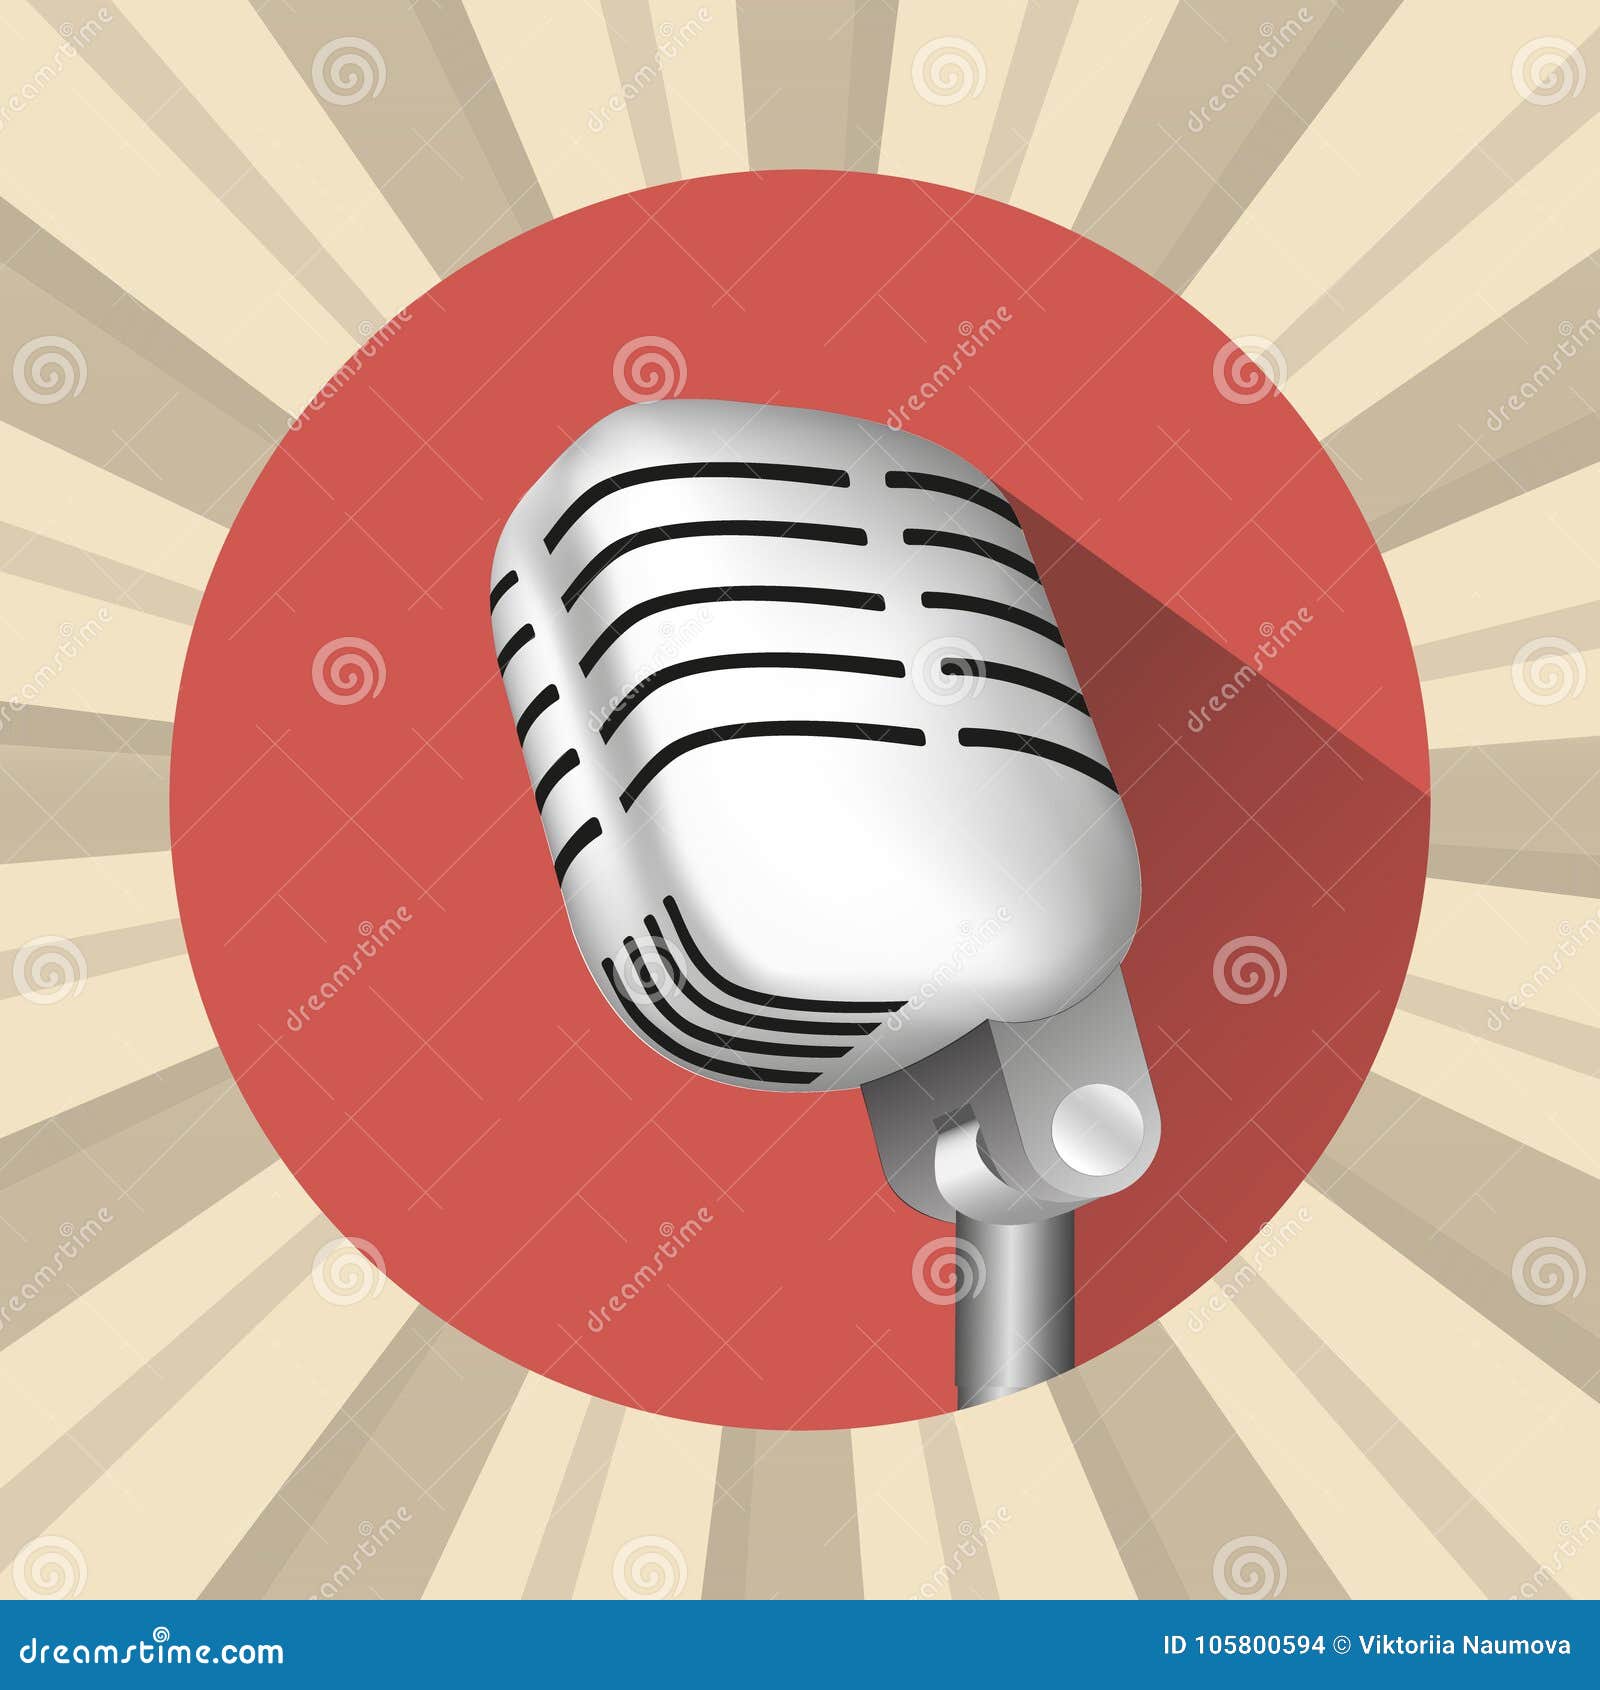 Vintage Retro Stage Microphone - Web Icon. Old Technology Object Concept.  Design Sign, Vector Art Image Illustration, Isolated. Editorial Stock Image  - Illustration of karaoke, media: 105800594